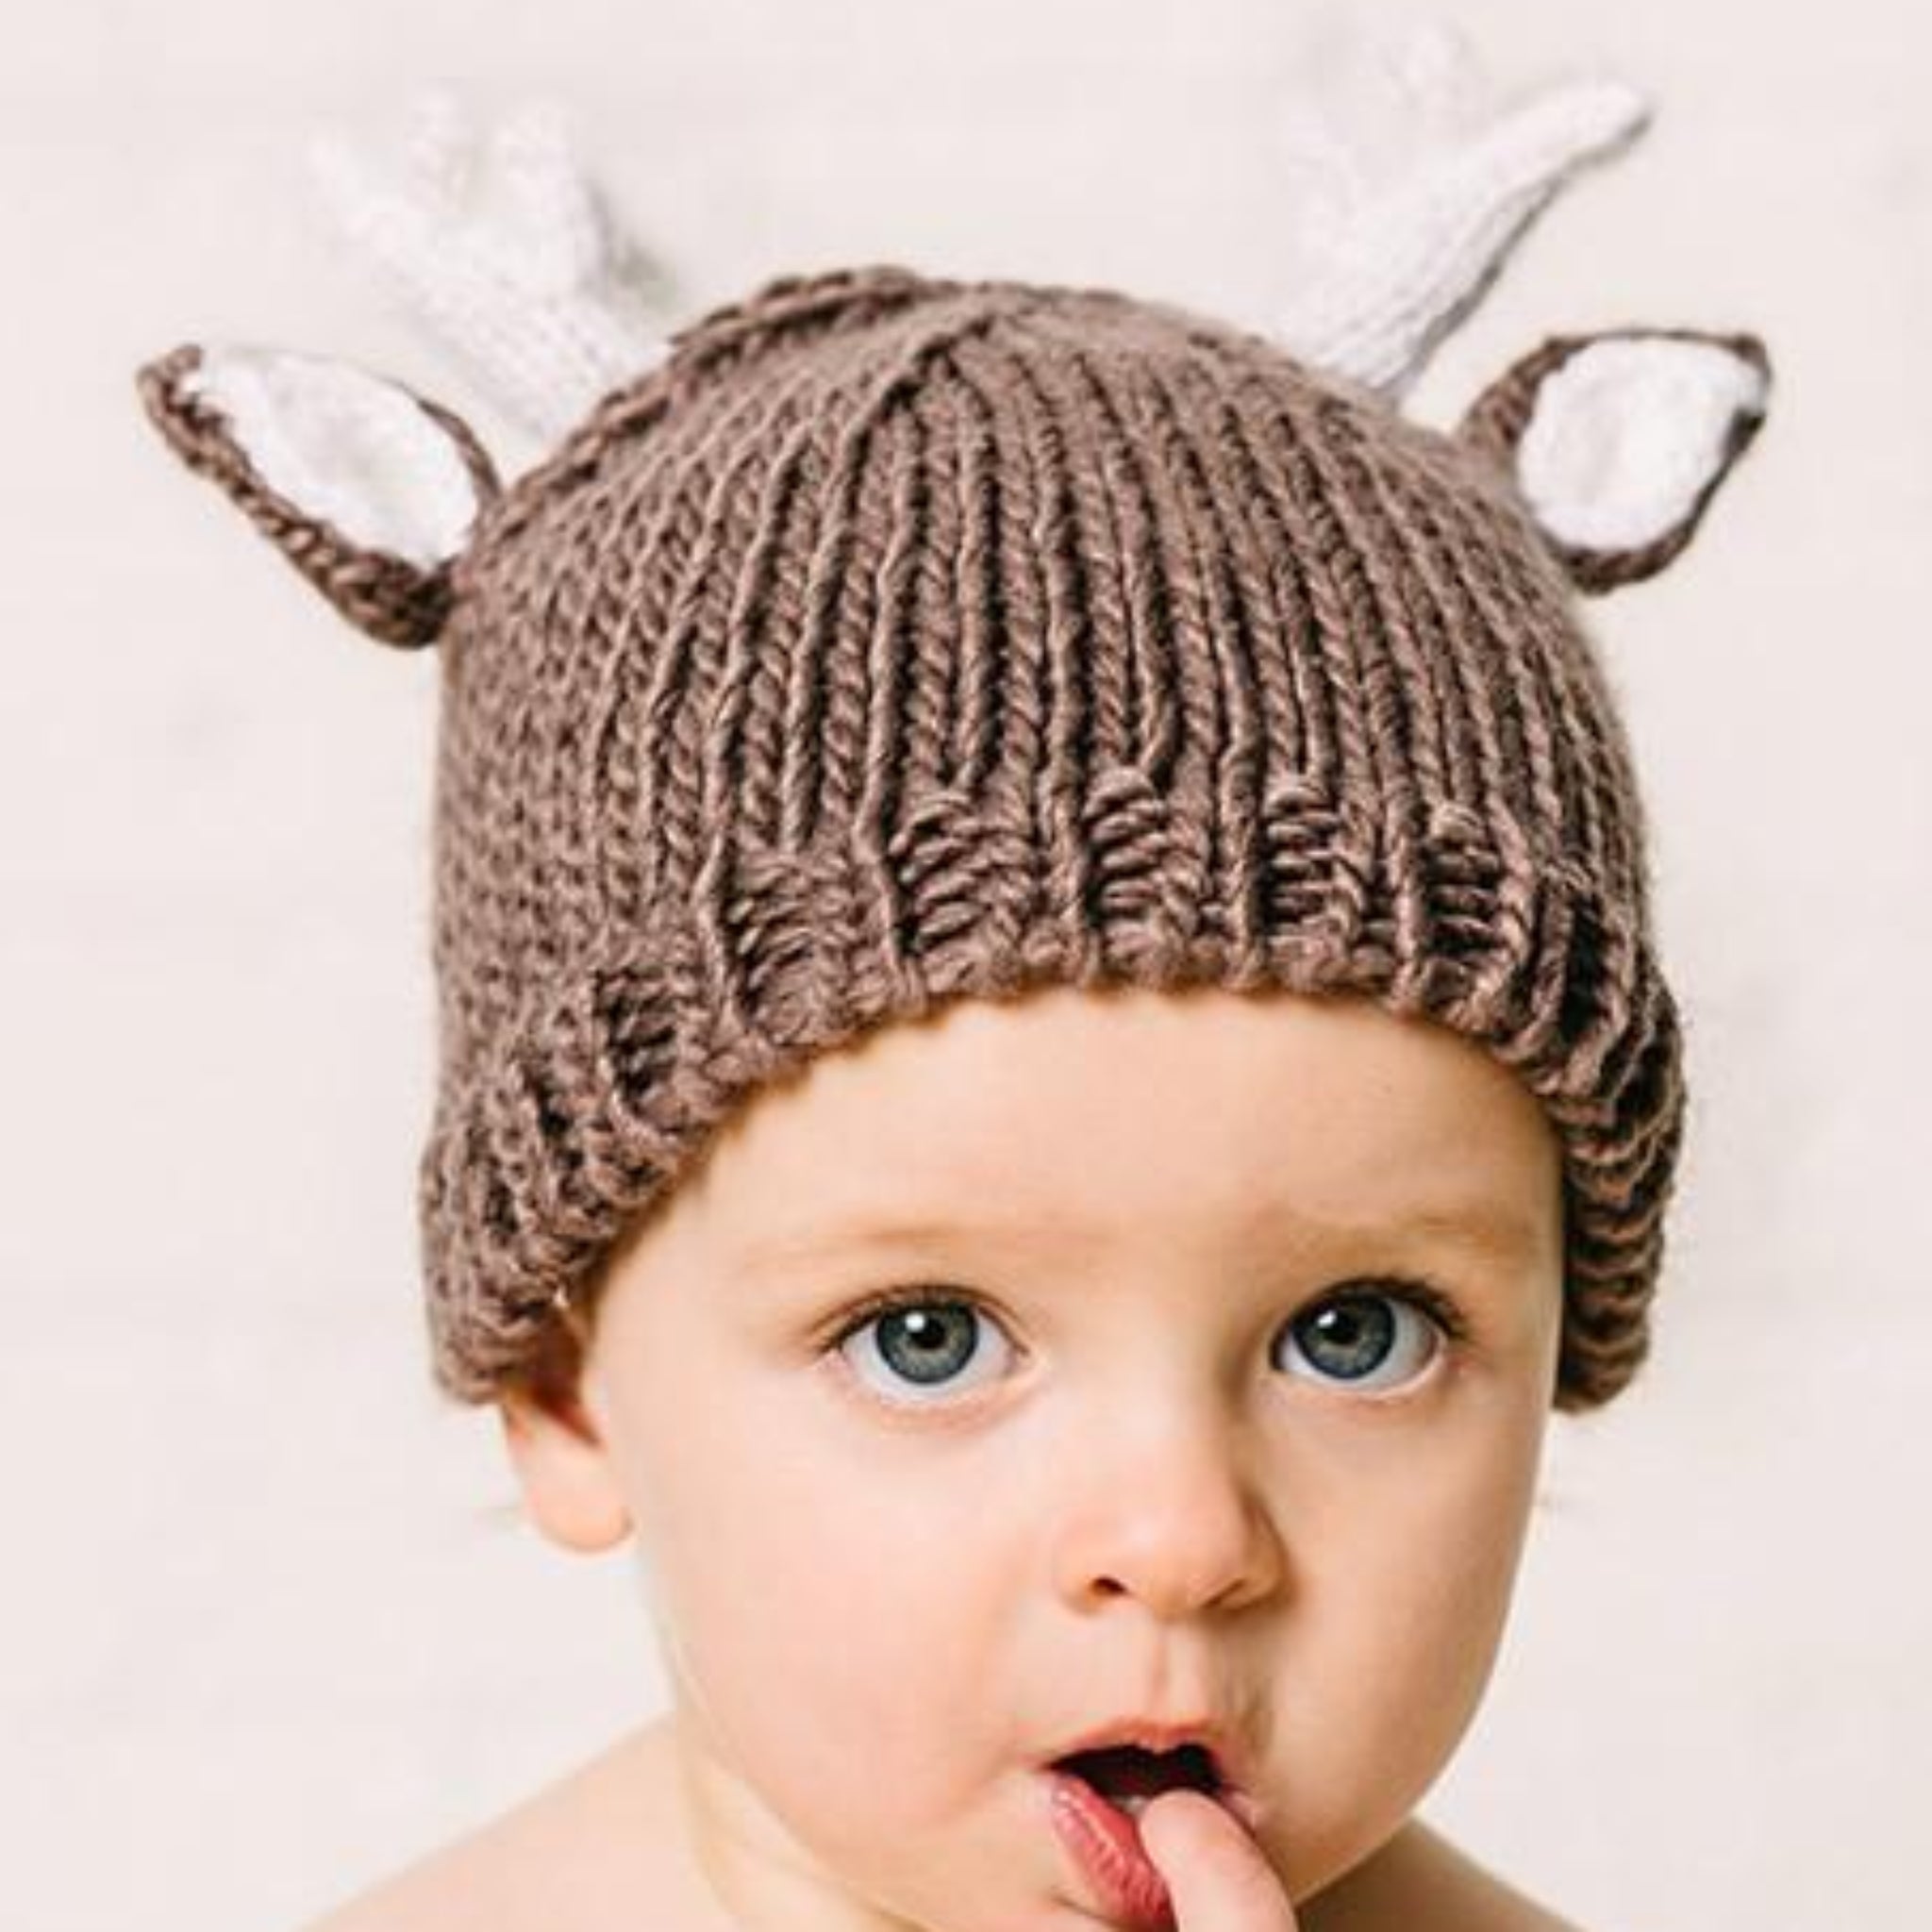 The Blueberry Hill Hartley Deer Tan Knit Hat